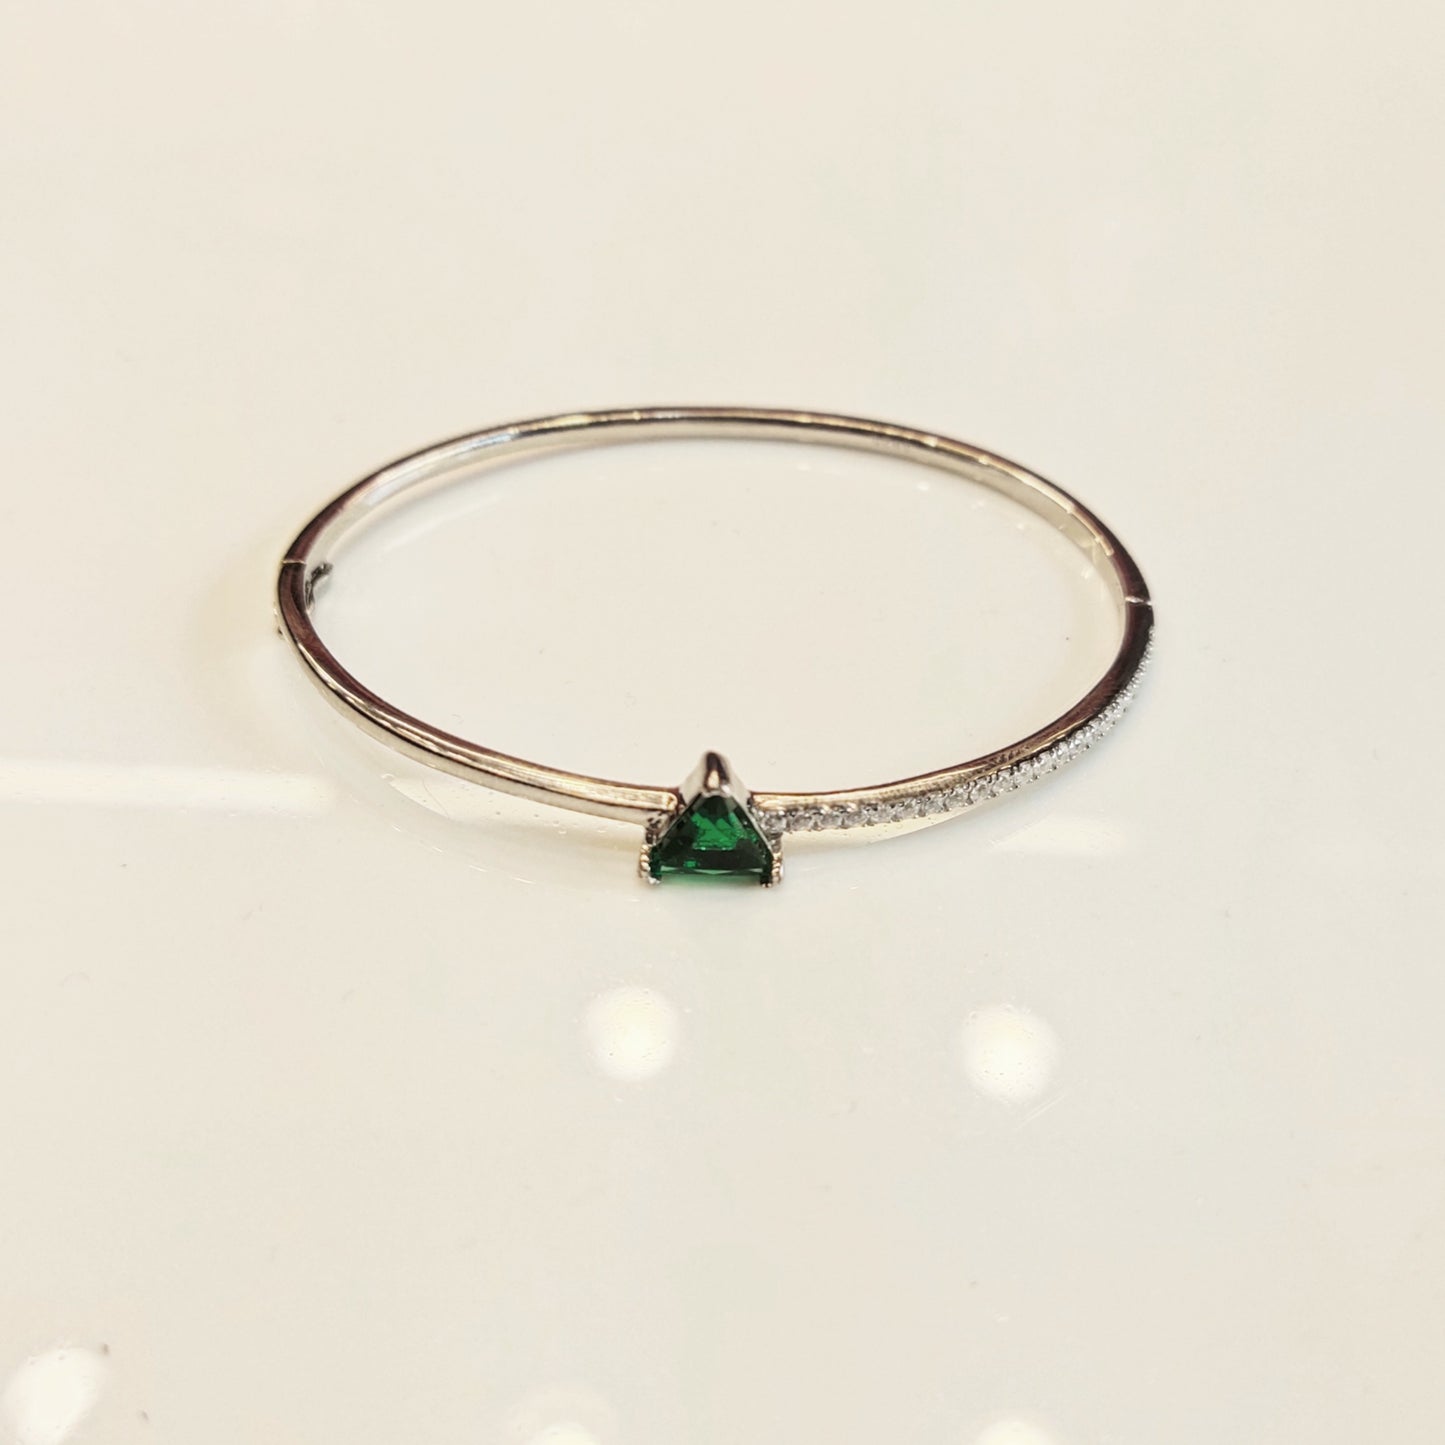 "Effortlessly Elegant: Discover the Classy Charm of the 925 Silver Bangle Bracelet by Asp Silver"